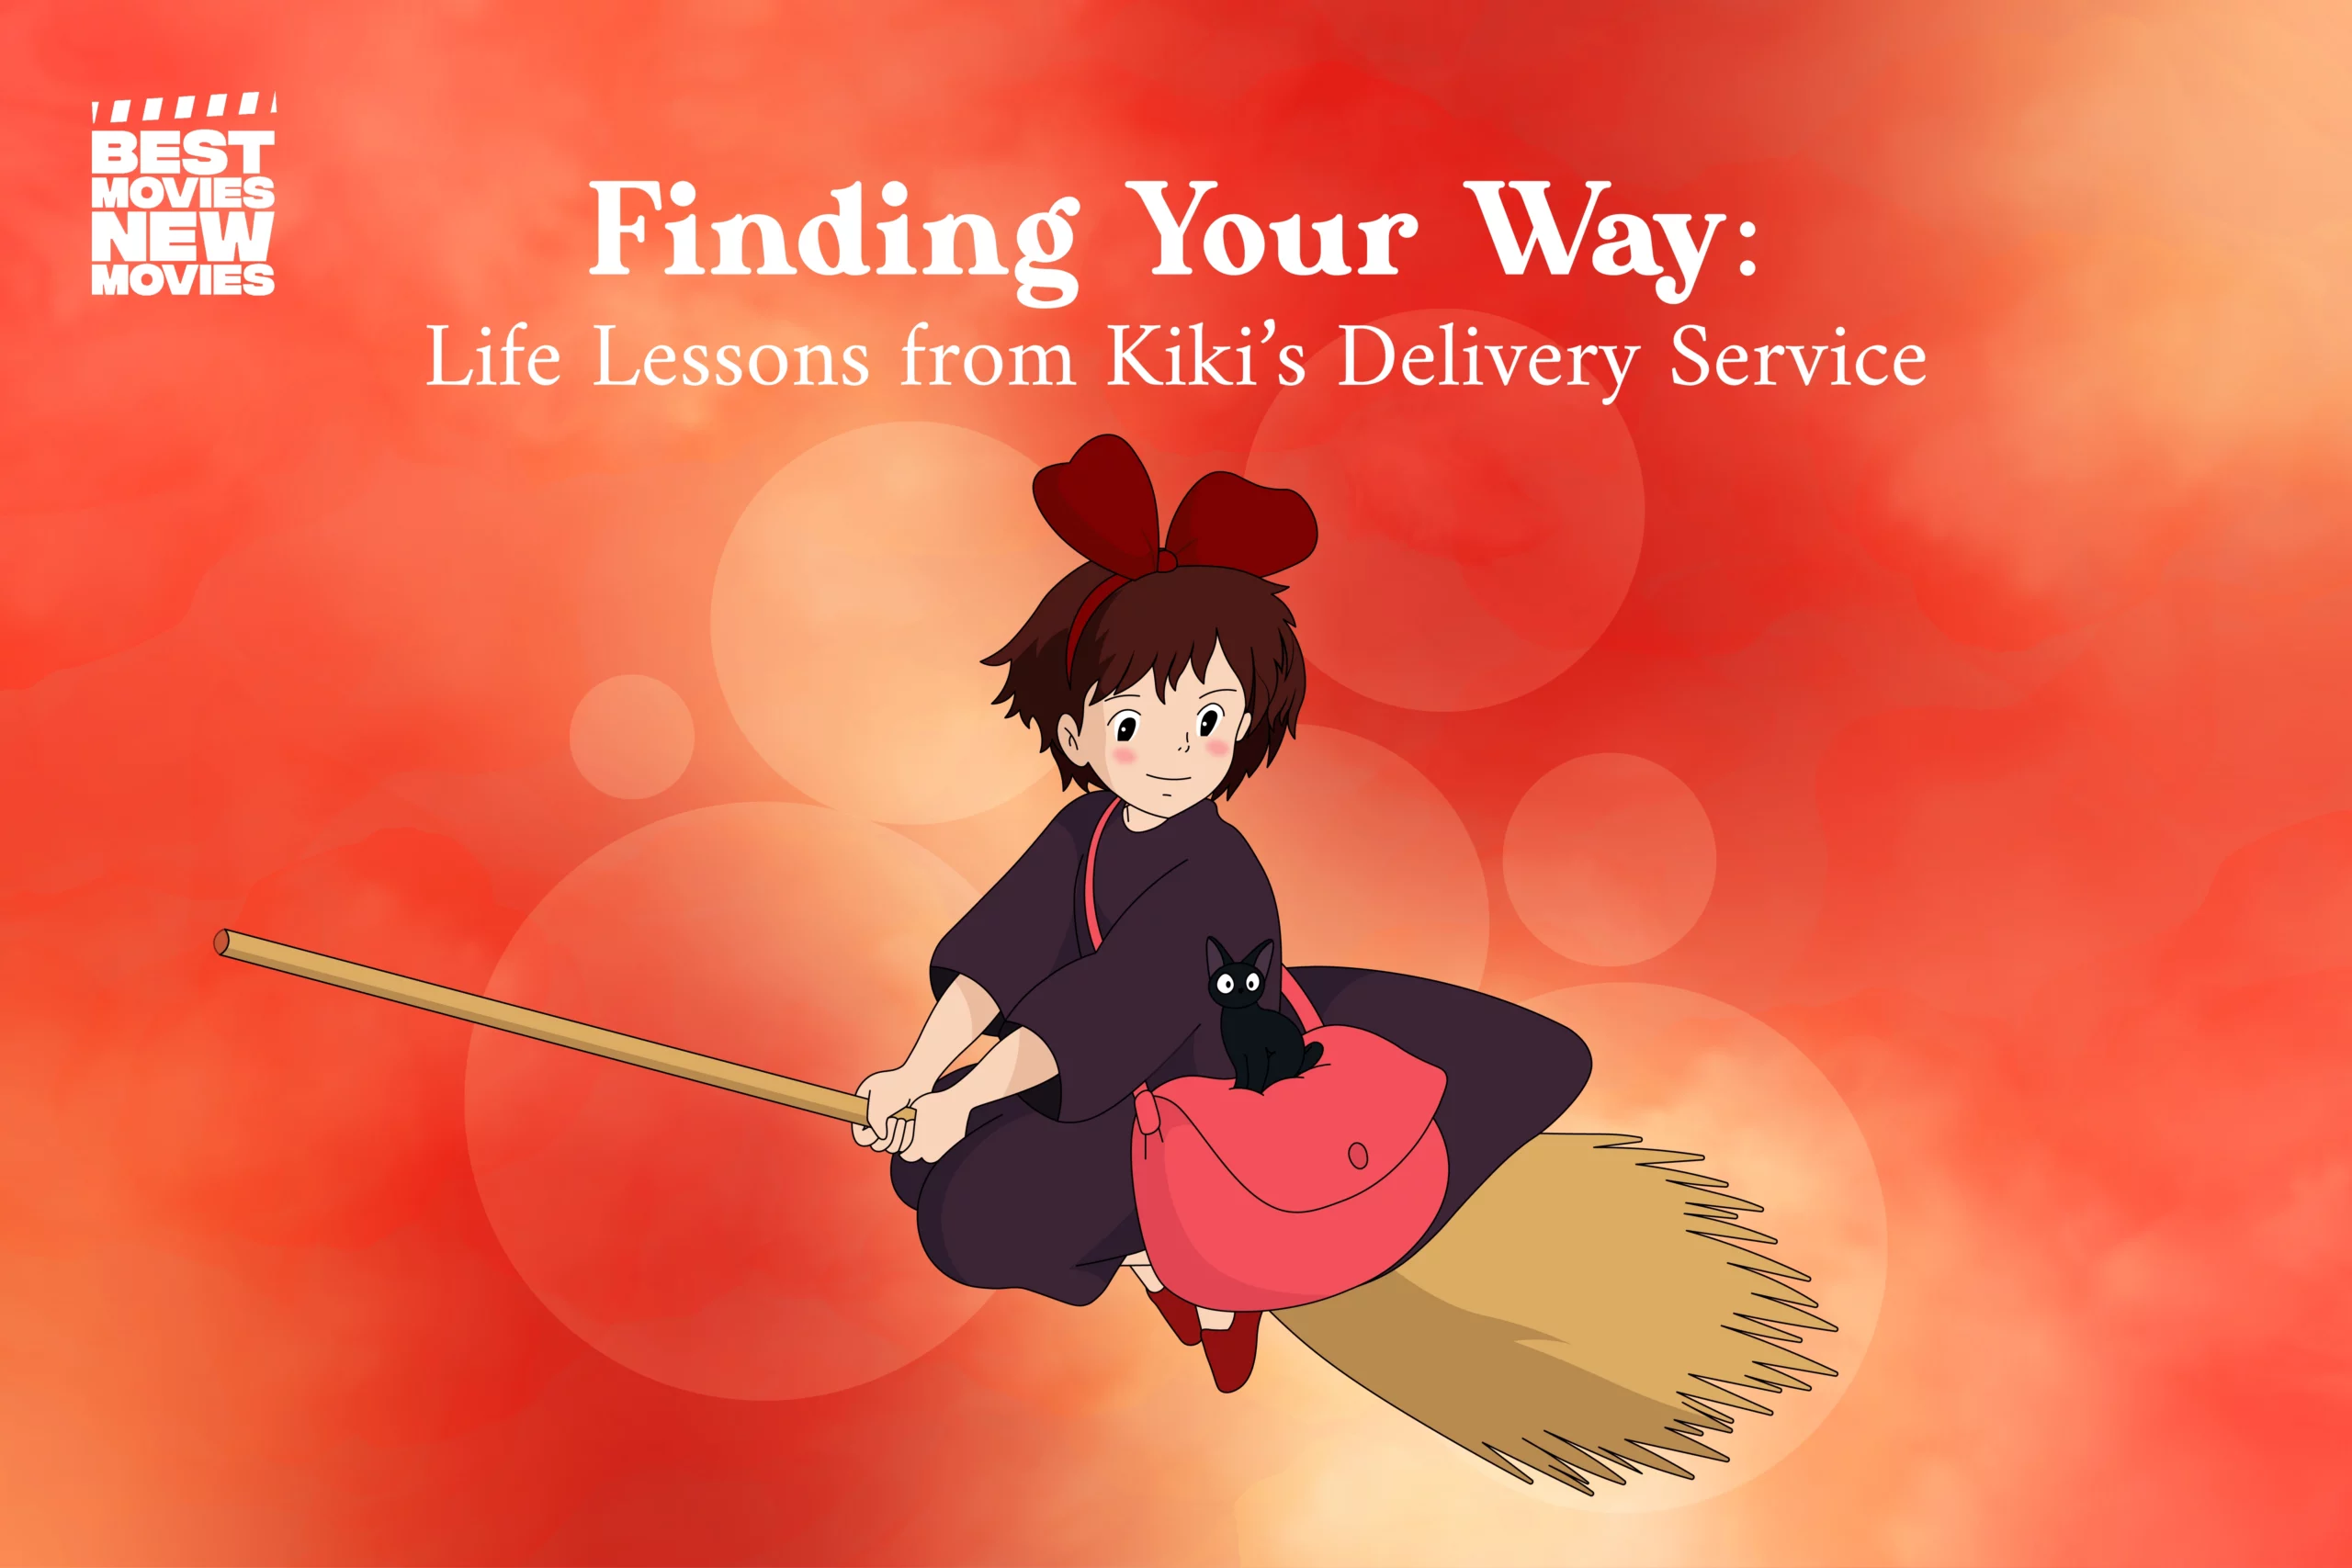 Finding Your Way: Life Lessons from Kiki's Delivery Service